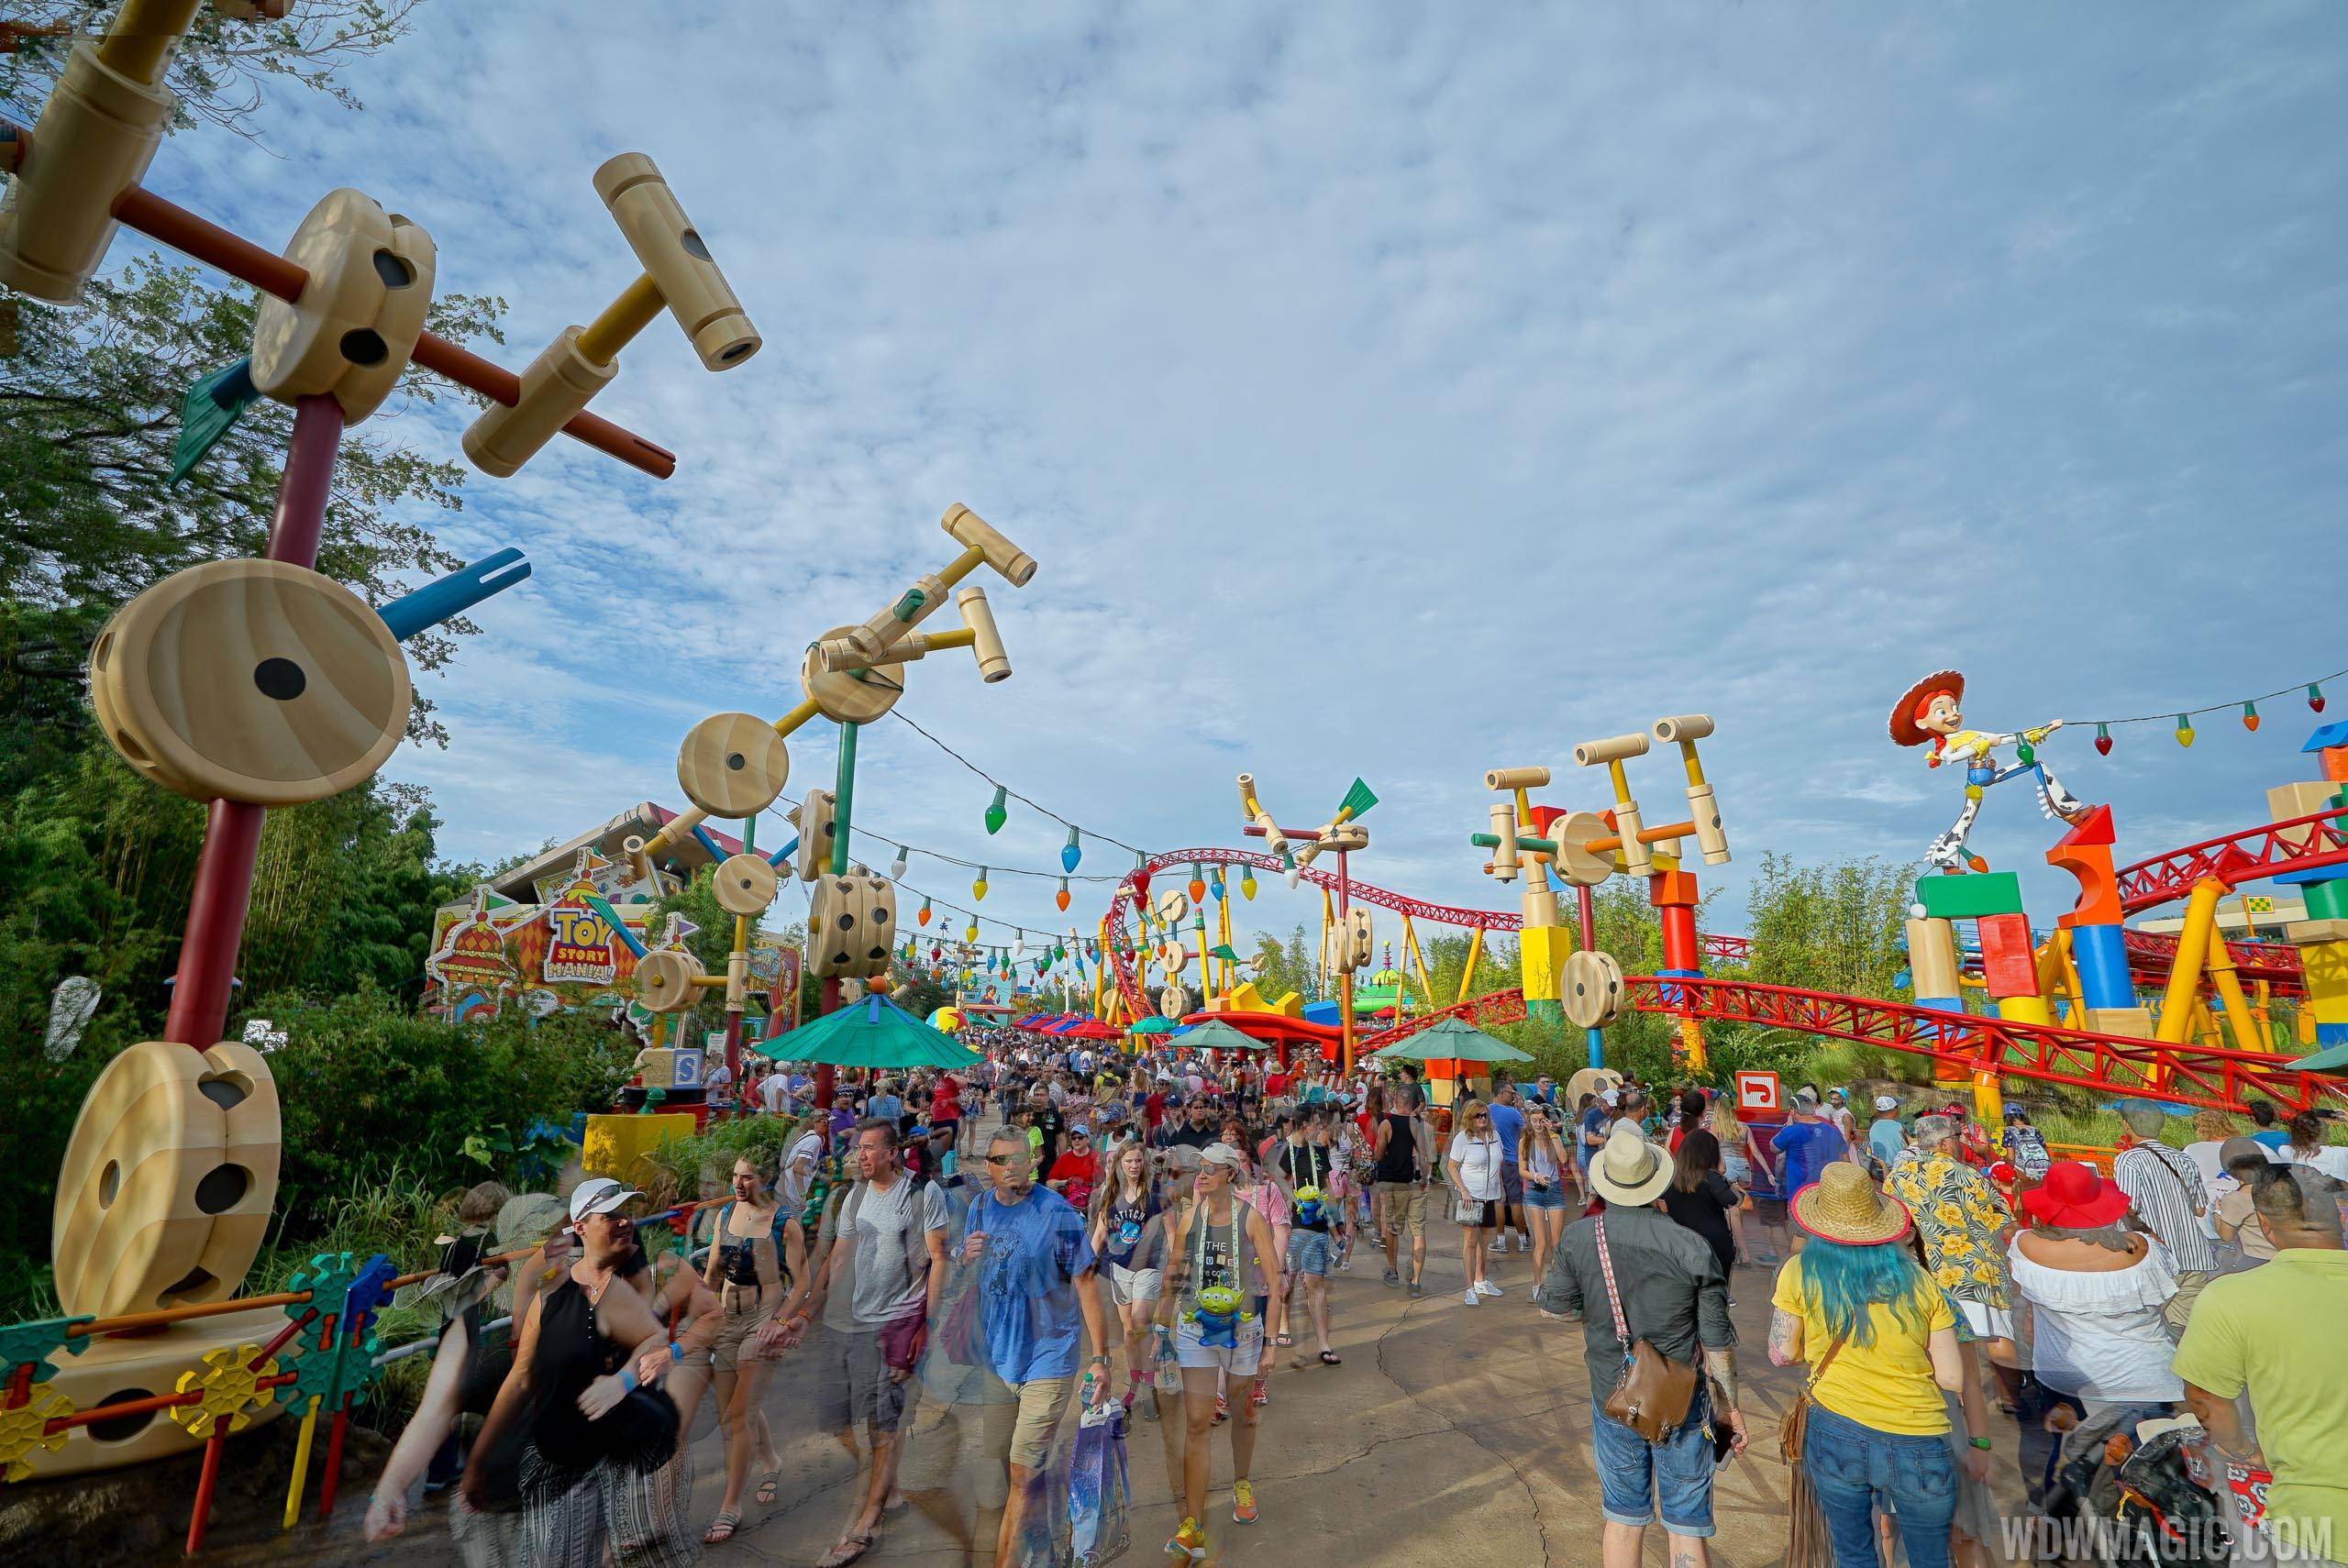 Very busy main walkway in Toy Story Land